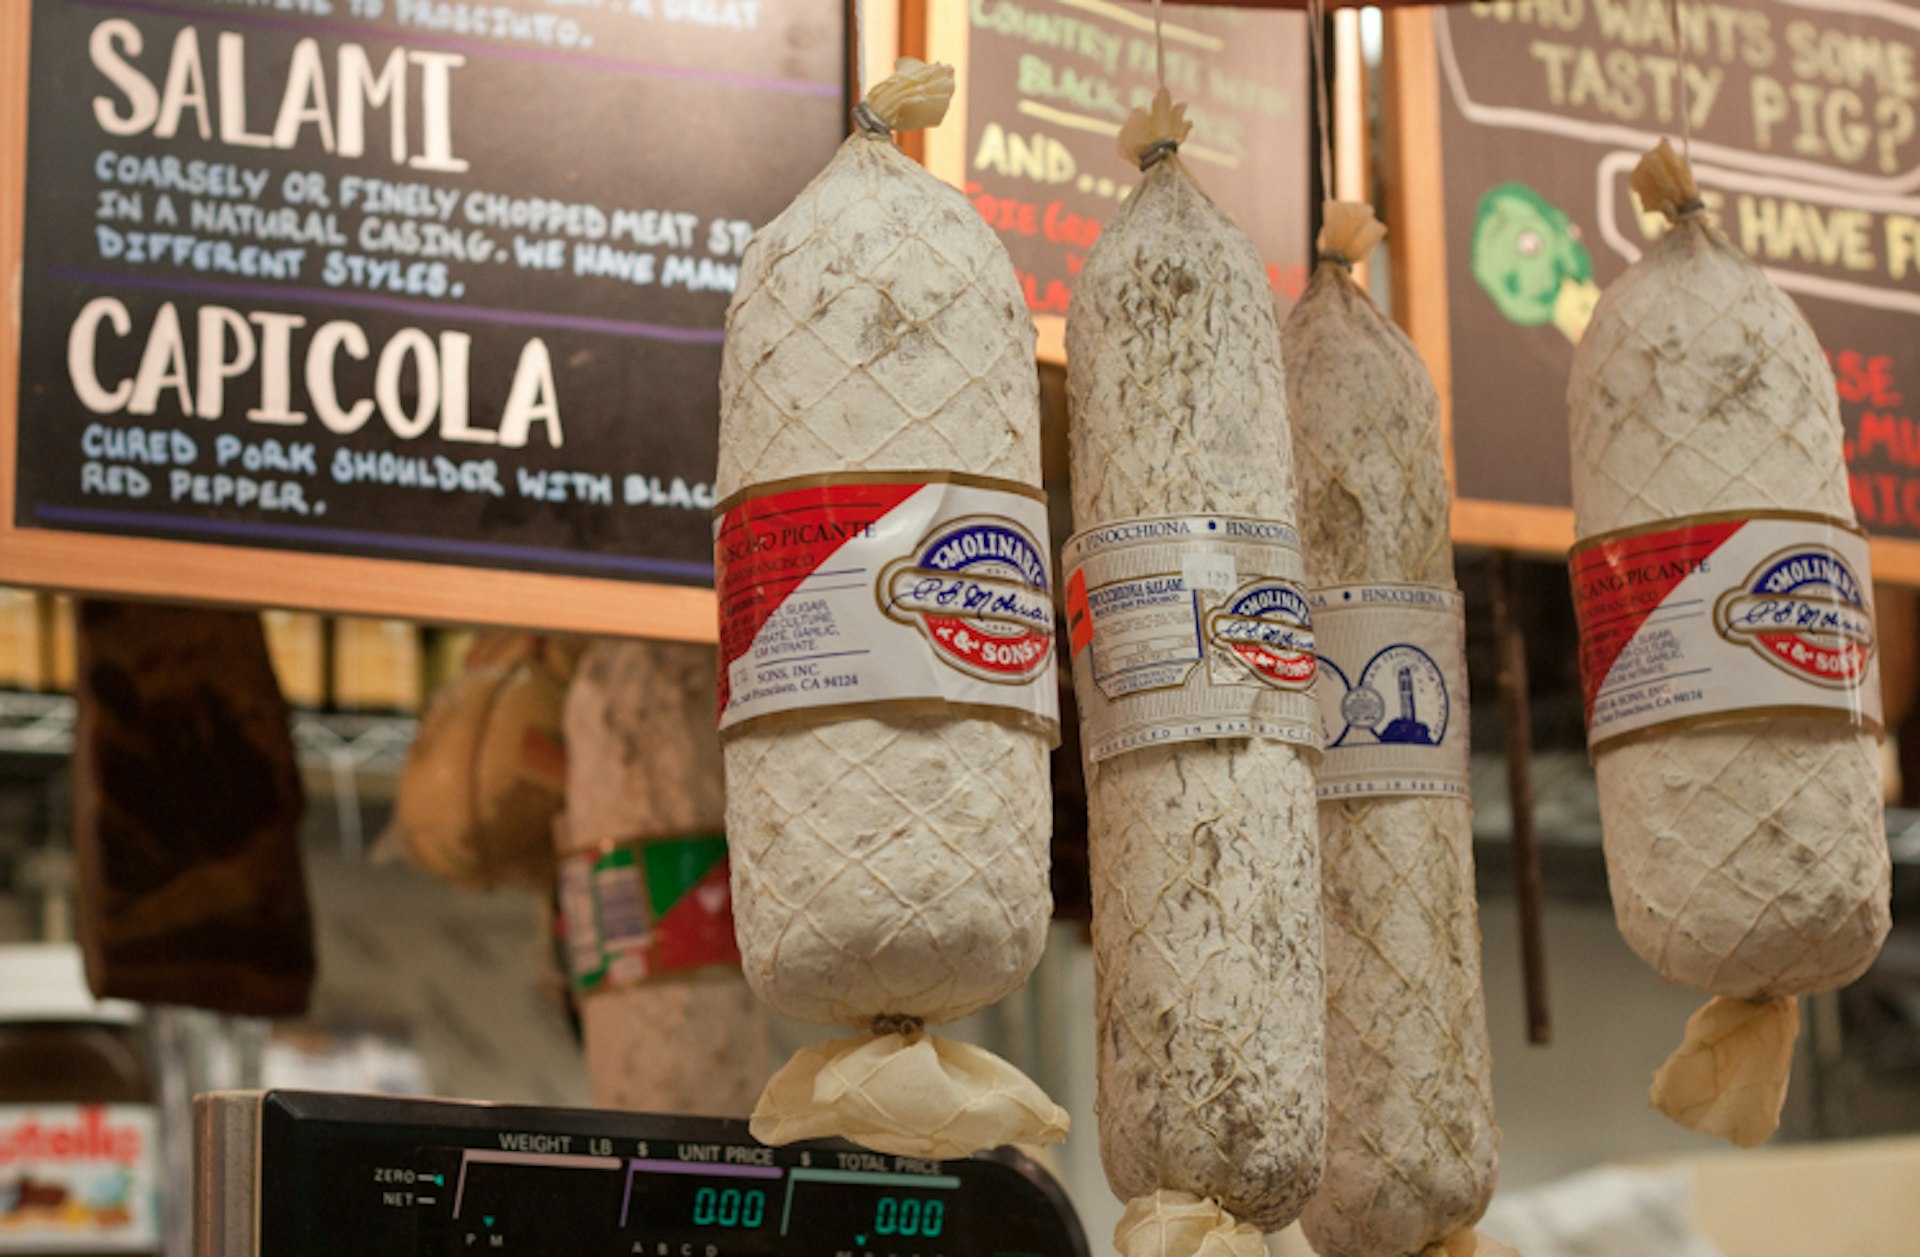 Salamis hanging in Philadelphia's Italian Market. Image by jbolles / CC BY-SA 2.0